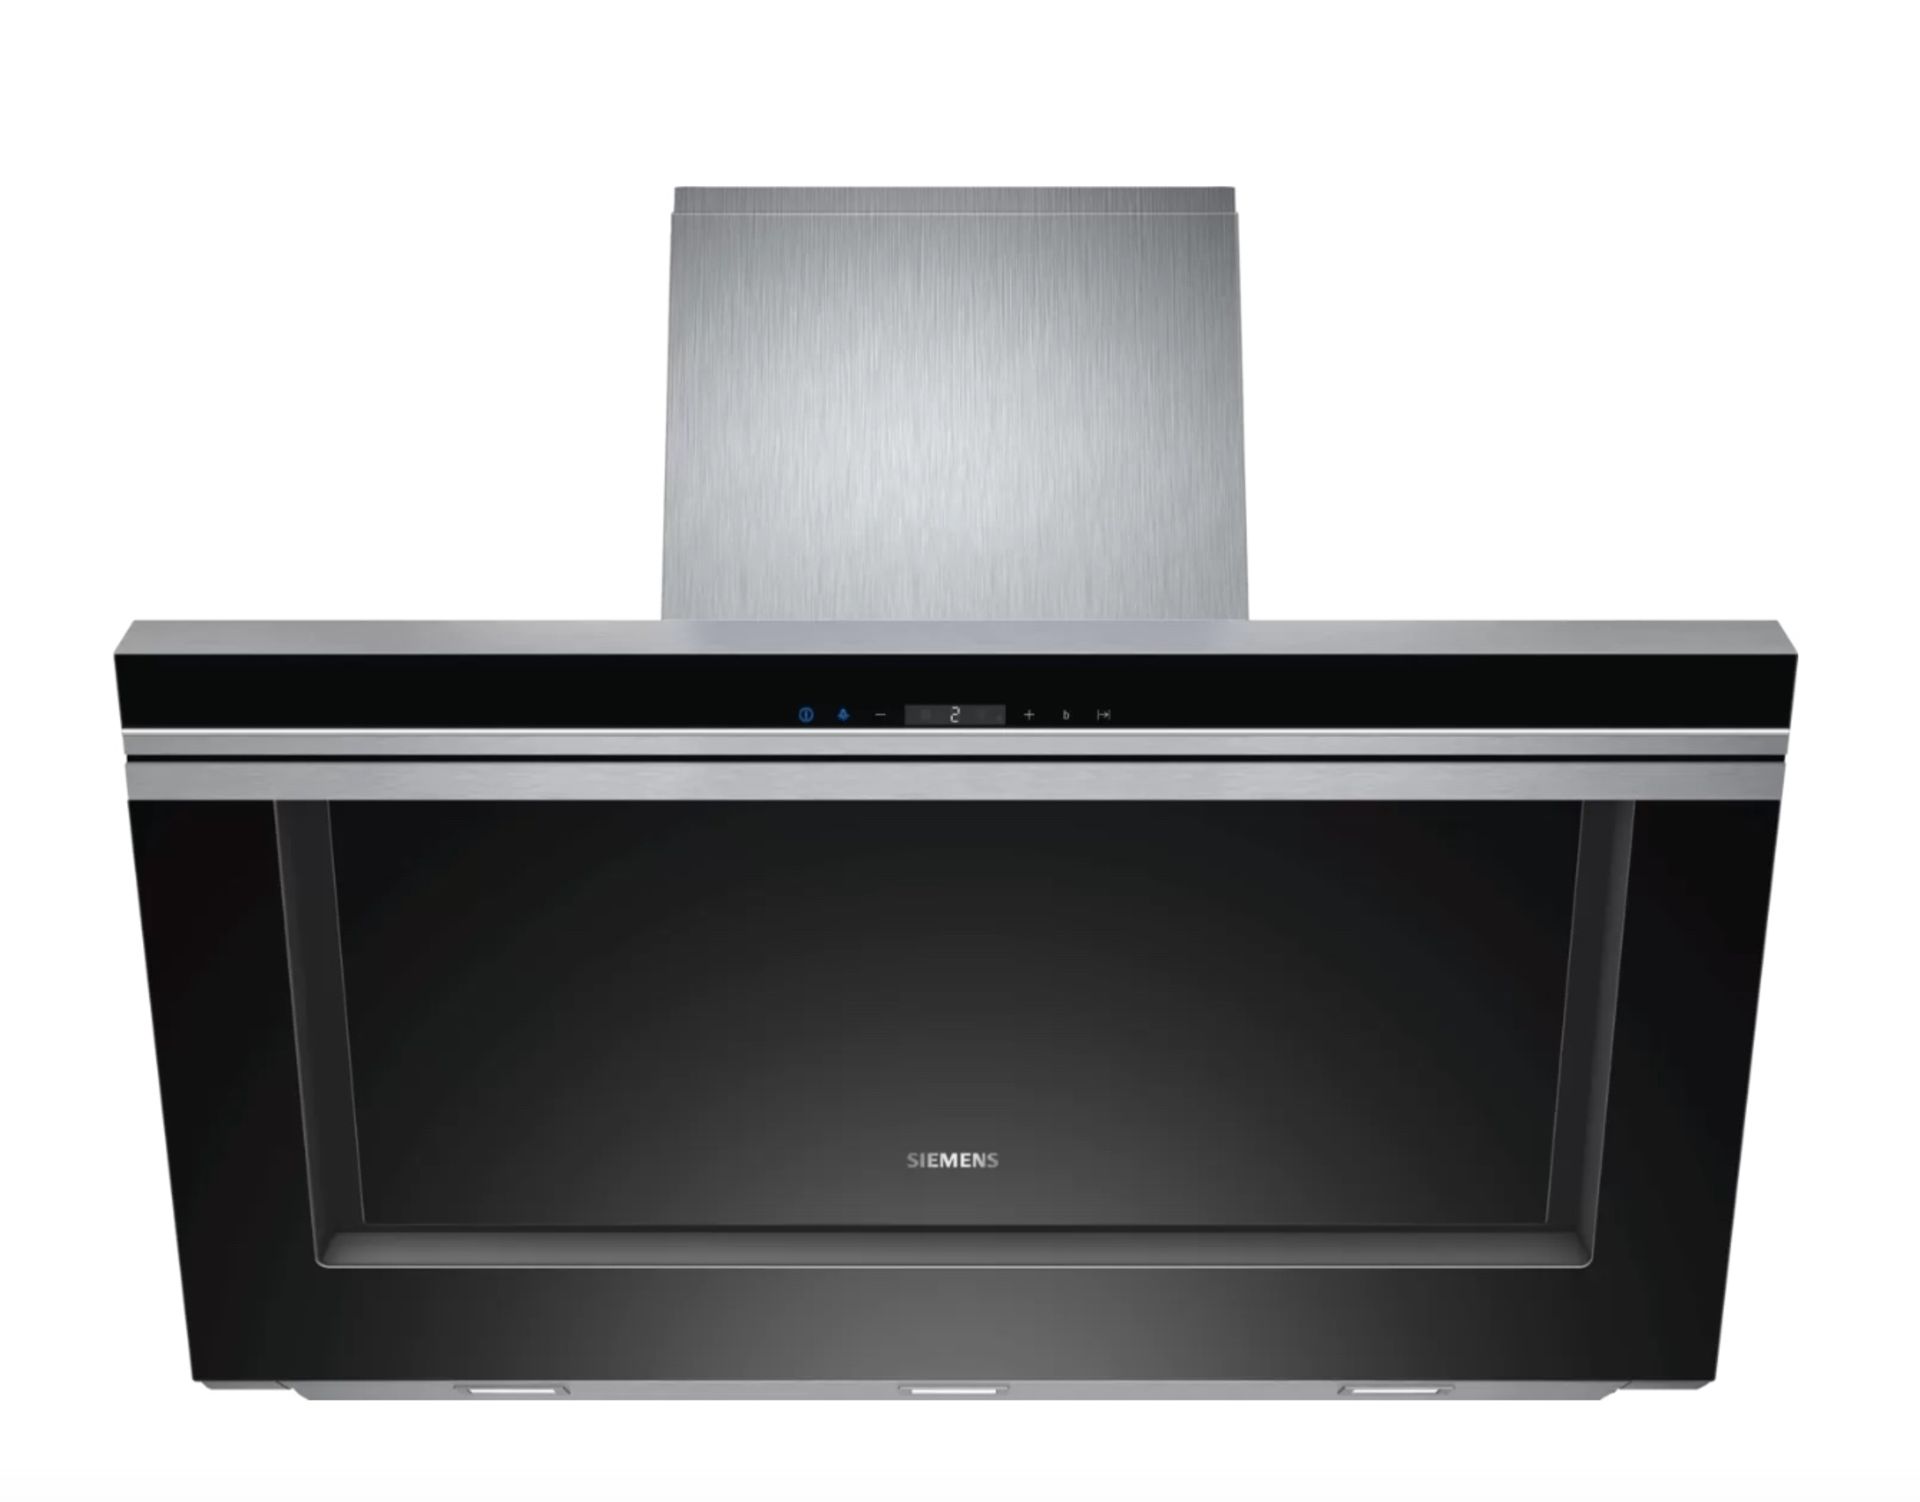 Brand New Boxed IQ700 - LC91KB672B Black Angled Chimney Hood by Siemens RRP £1500 - Image 2 of 3